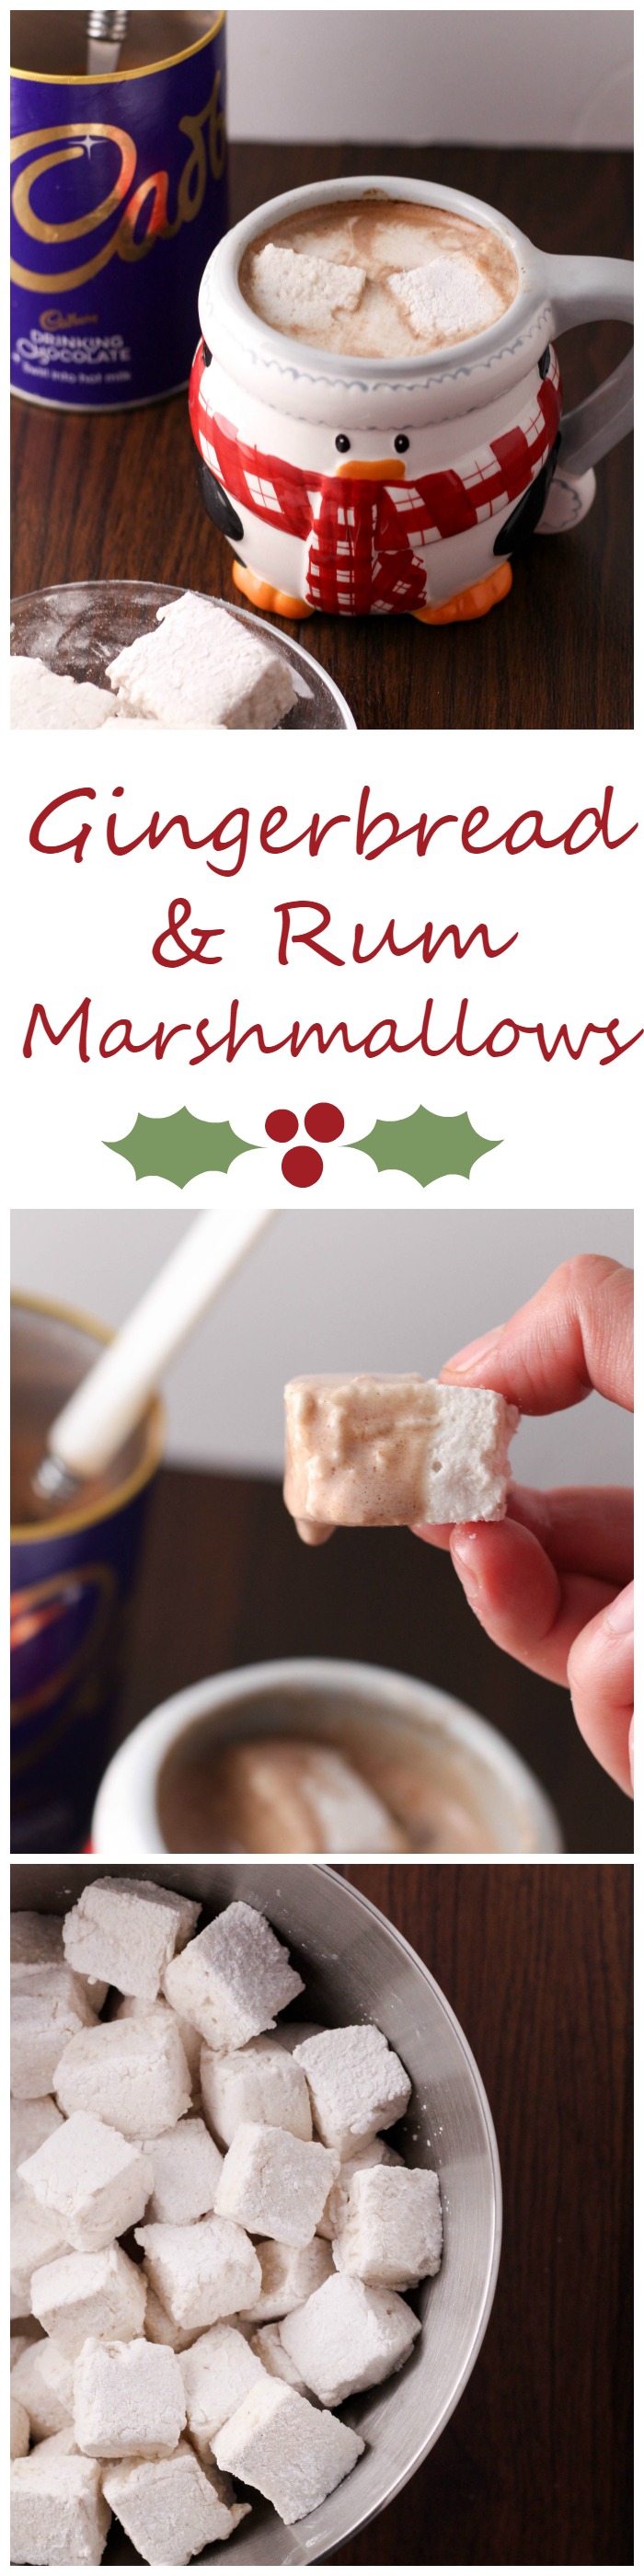 Delicious Gingerbread and Rum Marshmallows are perfect for the holidays